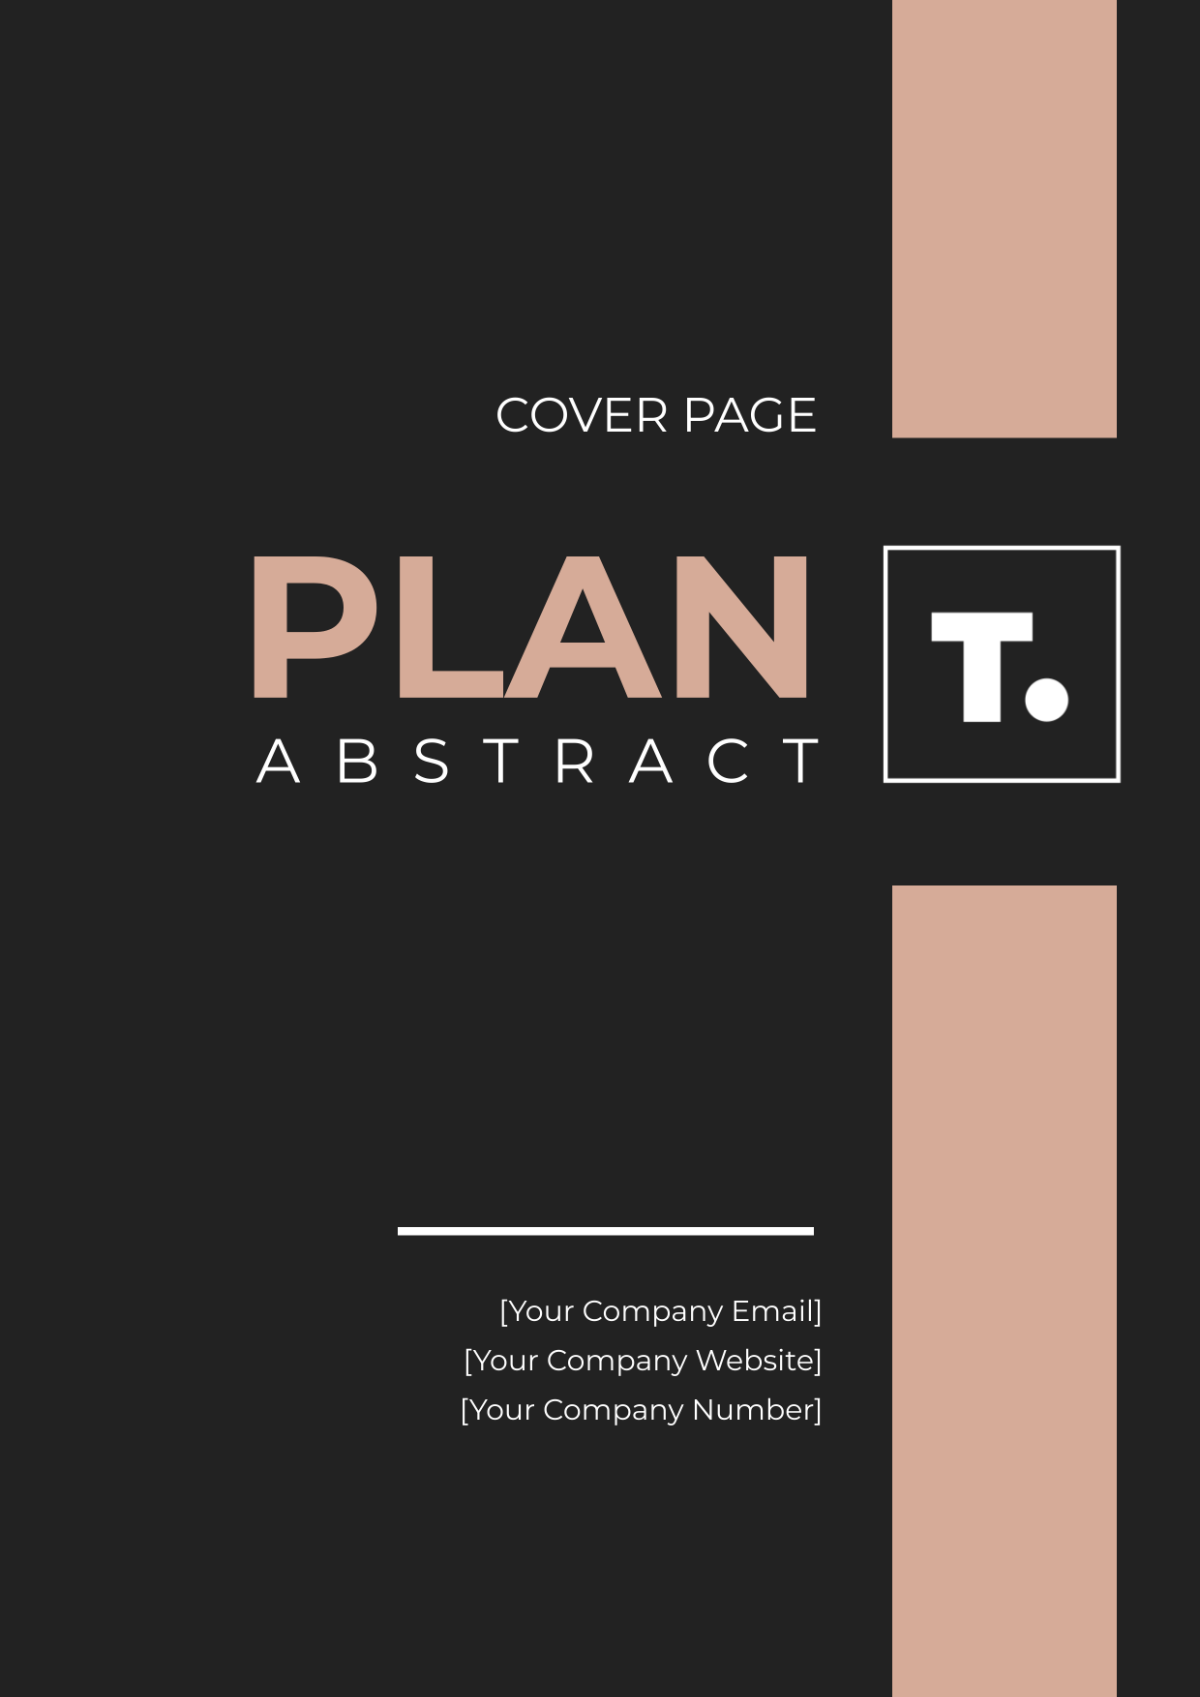 Plan Abstract Cover Page